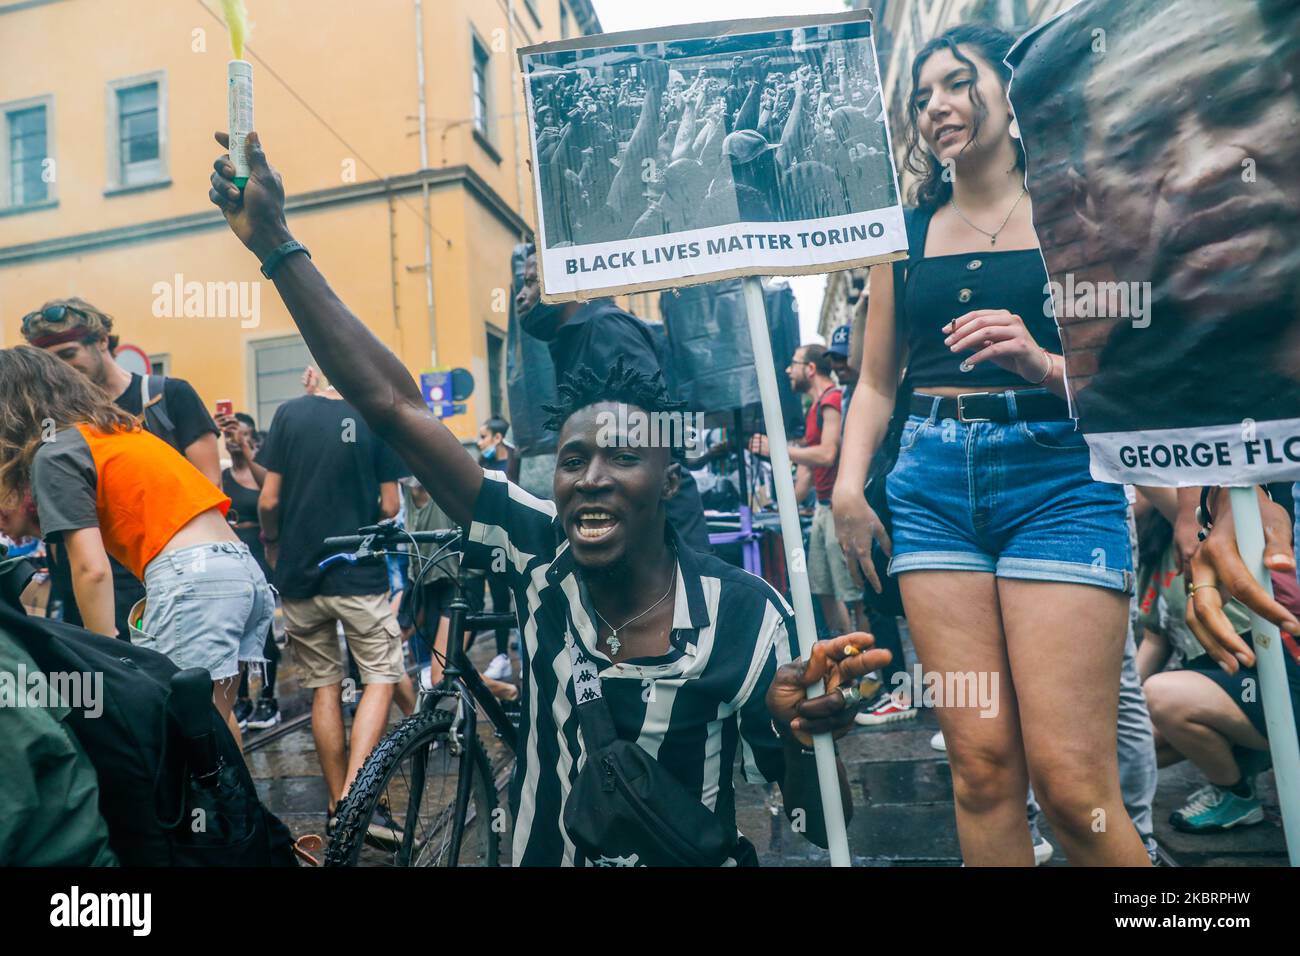 Turin, Italy 27th June 2020. Hundreds of demonstrators march to support Black Lives Matter during a protest against police brutality and racial inequality in the USA and other parts of the world in the aftermath of the death of George Floyd, which sparked protests worldwide. Demonstrators took part to voice their support for racial equality and to remember that racism is also an Italian problem. (Photo by Mauro Ujetto/NurPhoto) Stock Photo